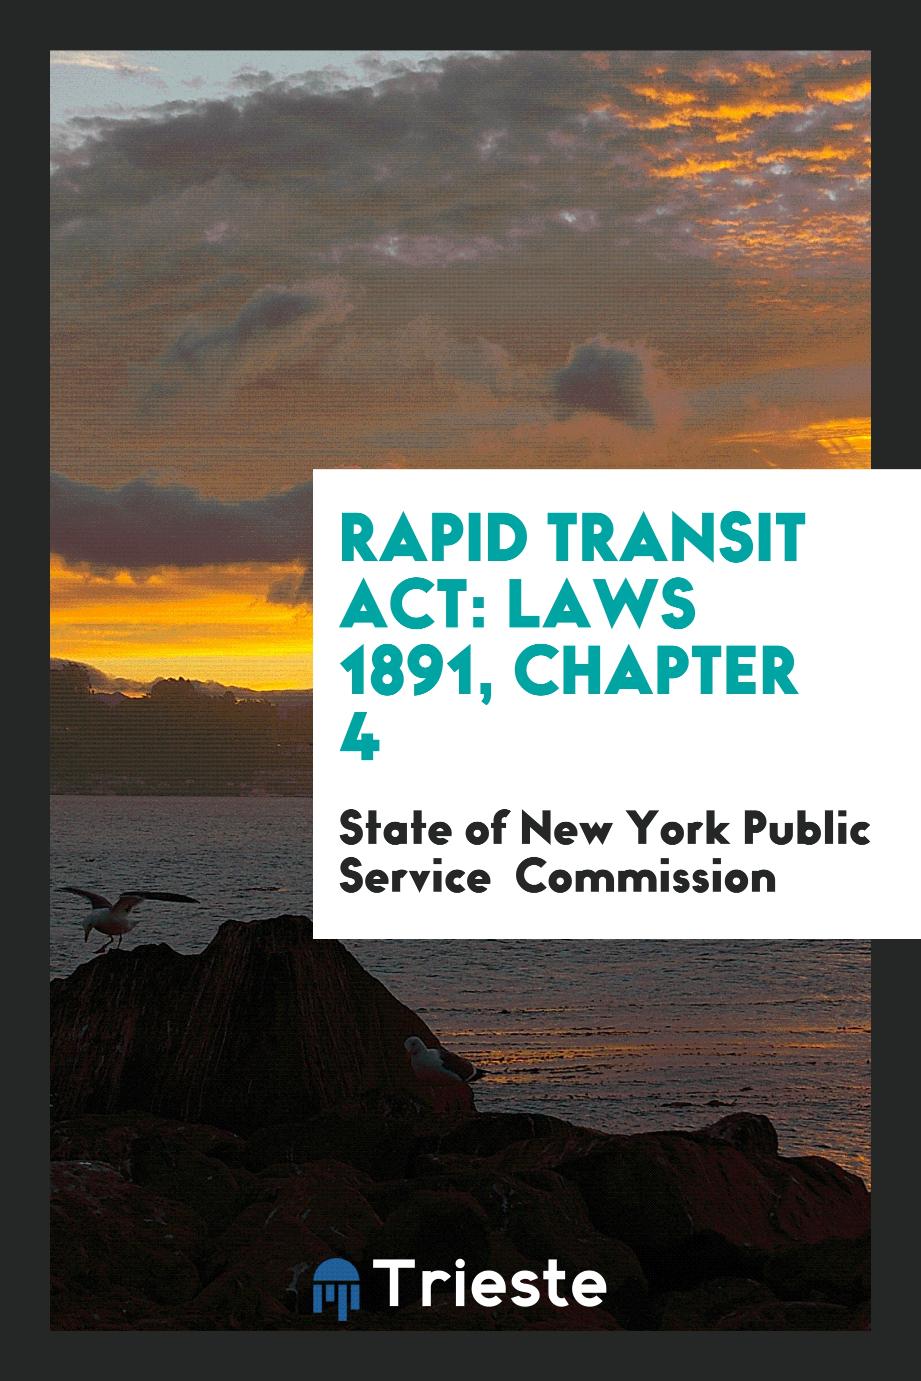 Rapid Transit Act: Laws 1891, Chapter 4